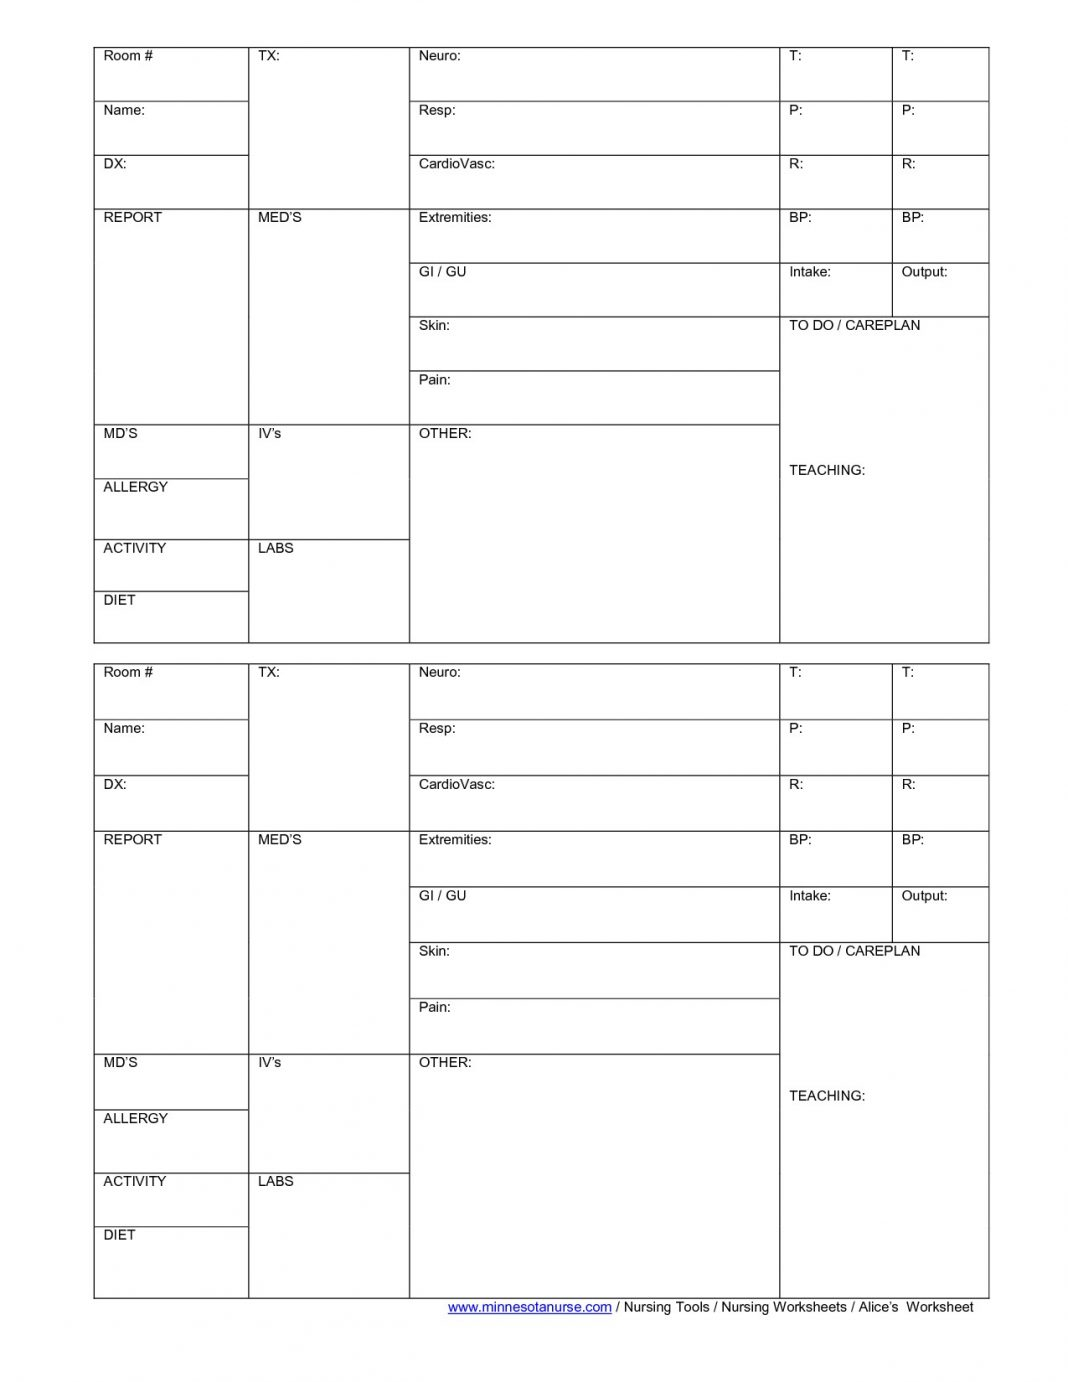 Psychiatric Nursing Shift Report Template End Of Examples Throughout Nurse Shift Report Sheet Template